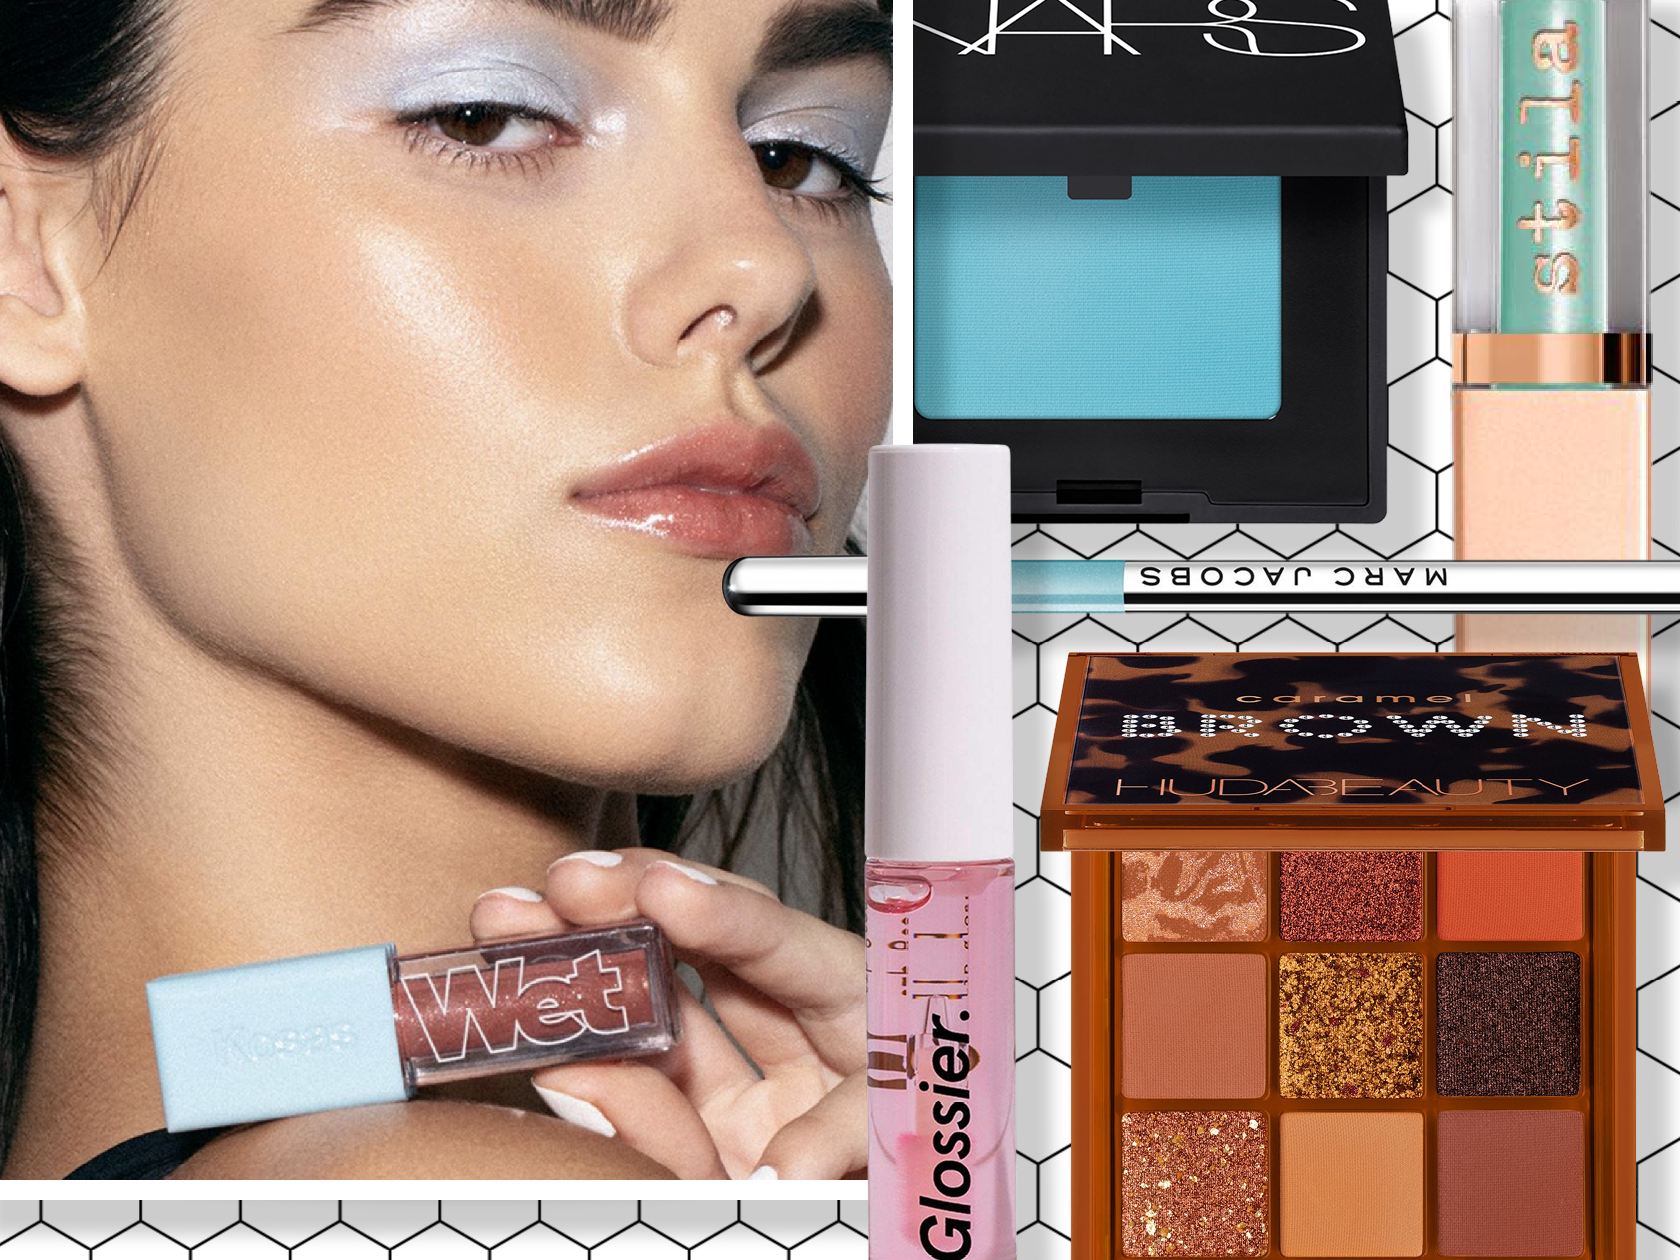 Cater slids Bekræfte 90s-inspired beauty is back: here's how to nail the trend